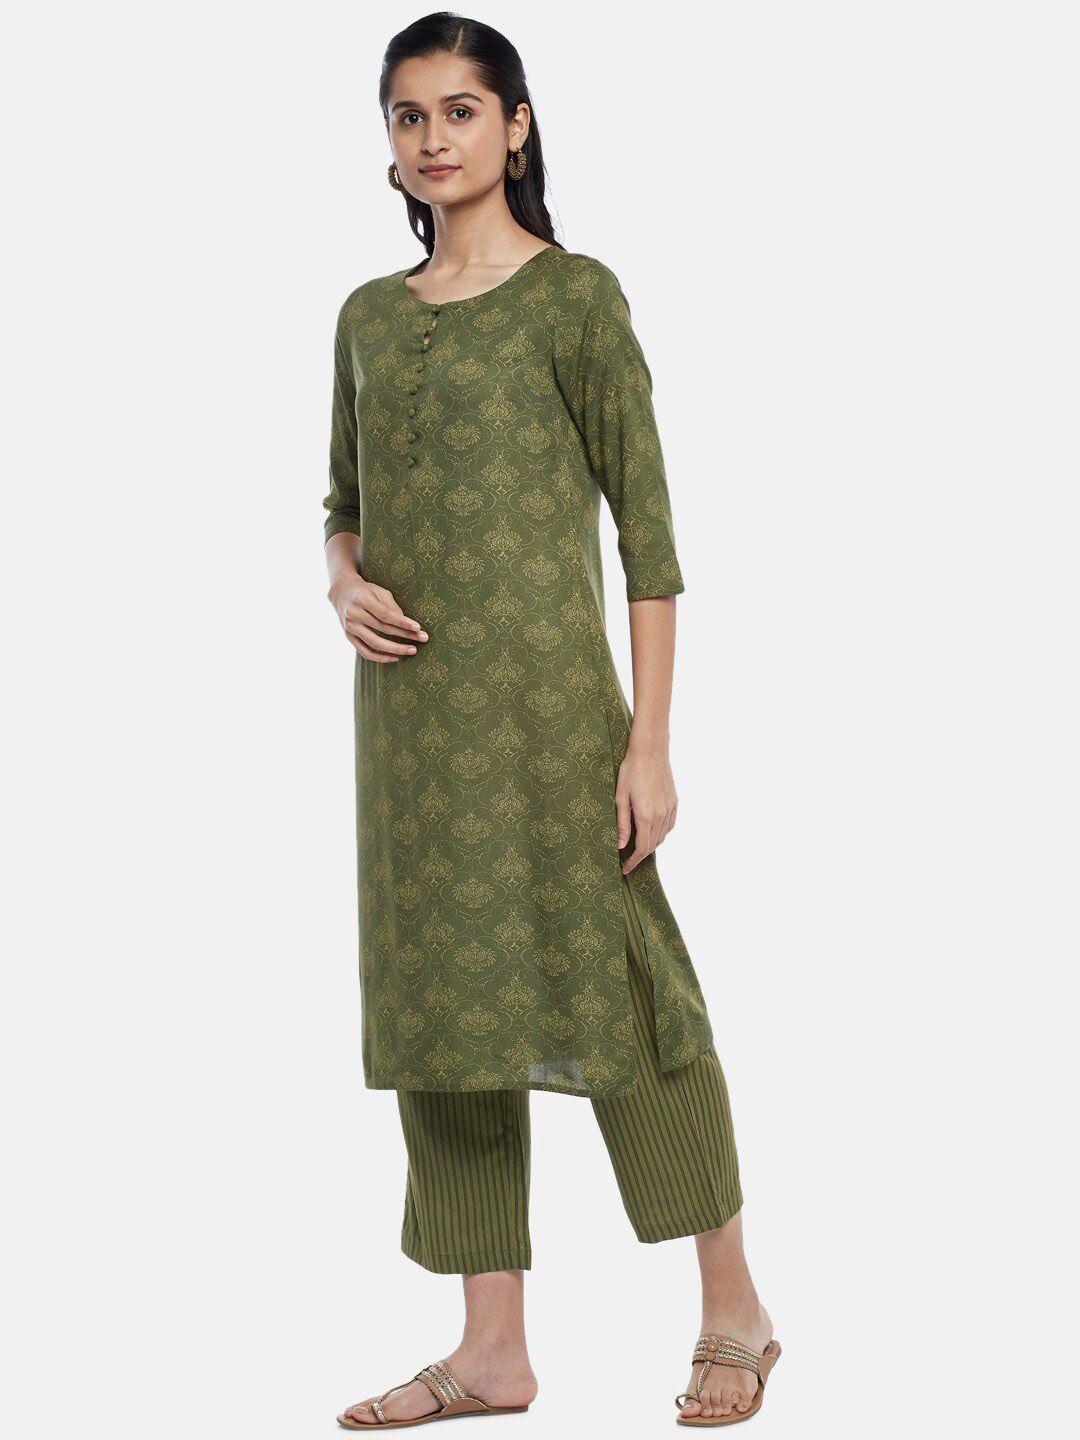 rangmanch by pantaloons women olive green ethnic motifs printed kurta with trousers